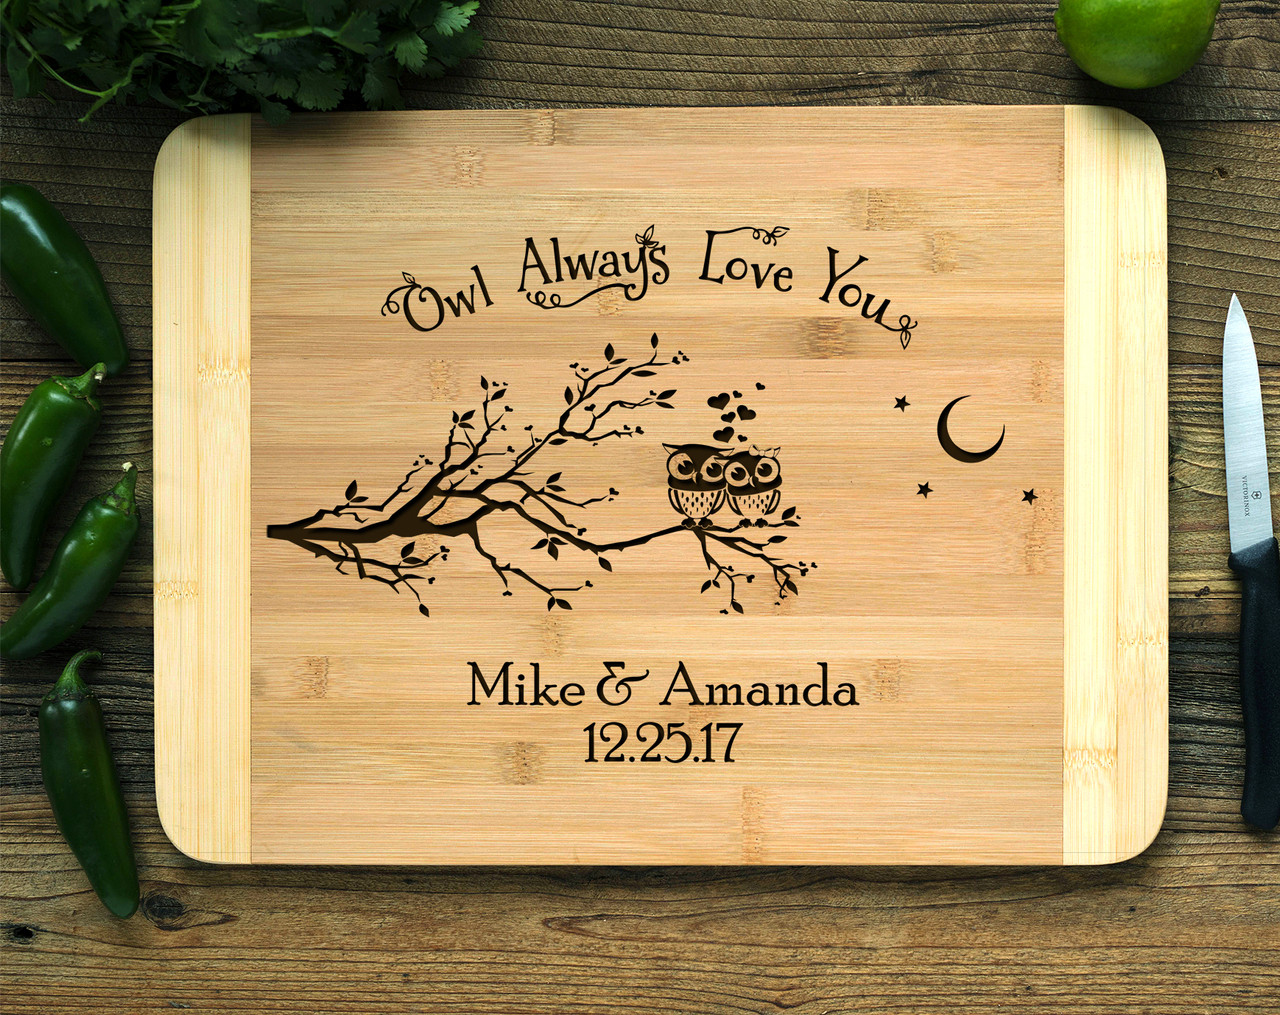 Owl Love you Personalized Cutting Board HDS